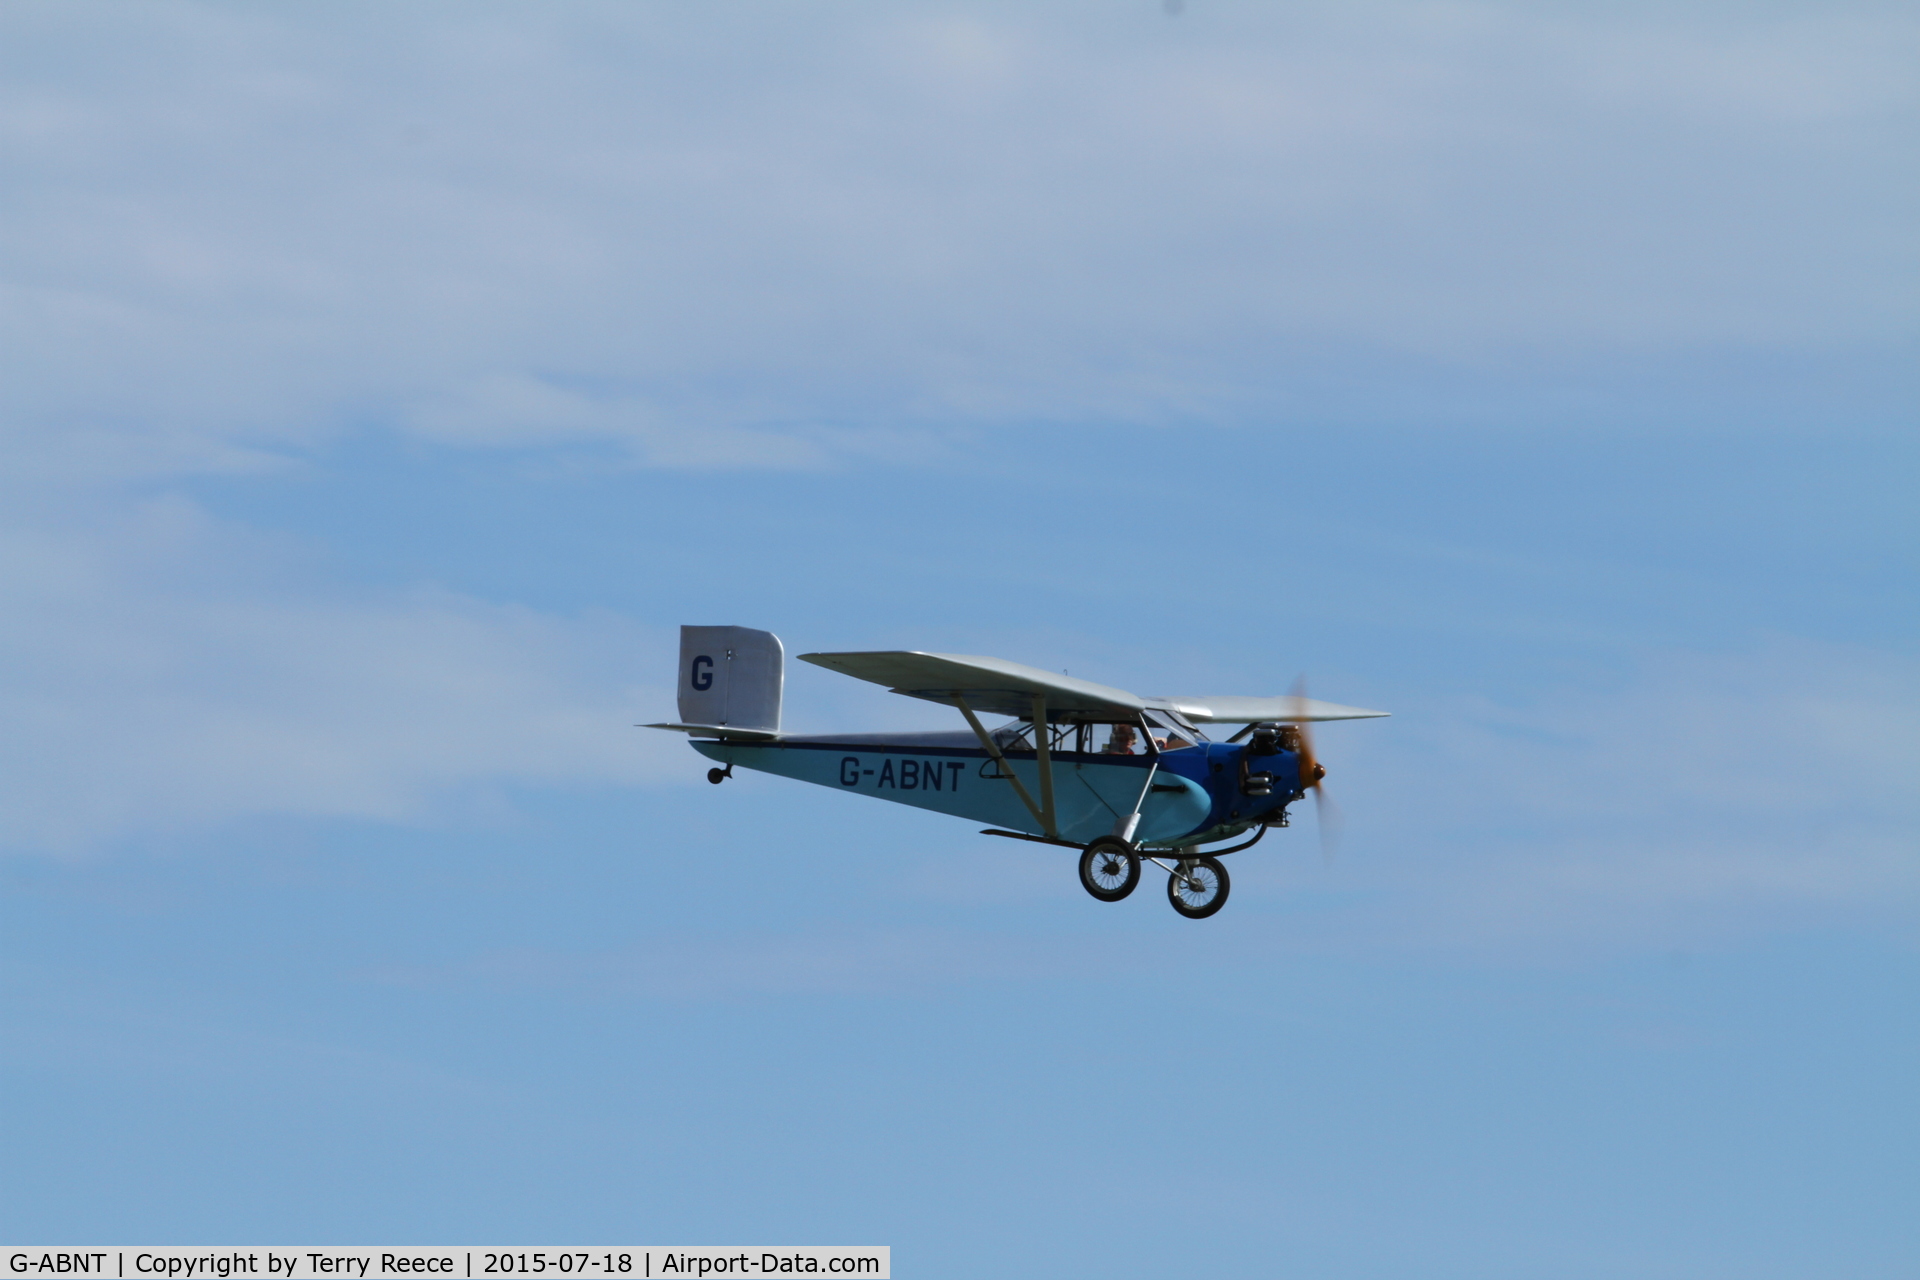 G-ABNT, 1931 Civilian Coupe 02 C/N 03, Coupe in flight over Bexhill on Sea, East Sussex 18/07/15